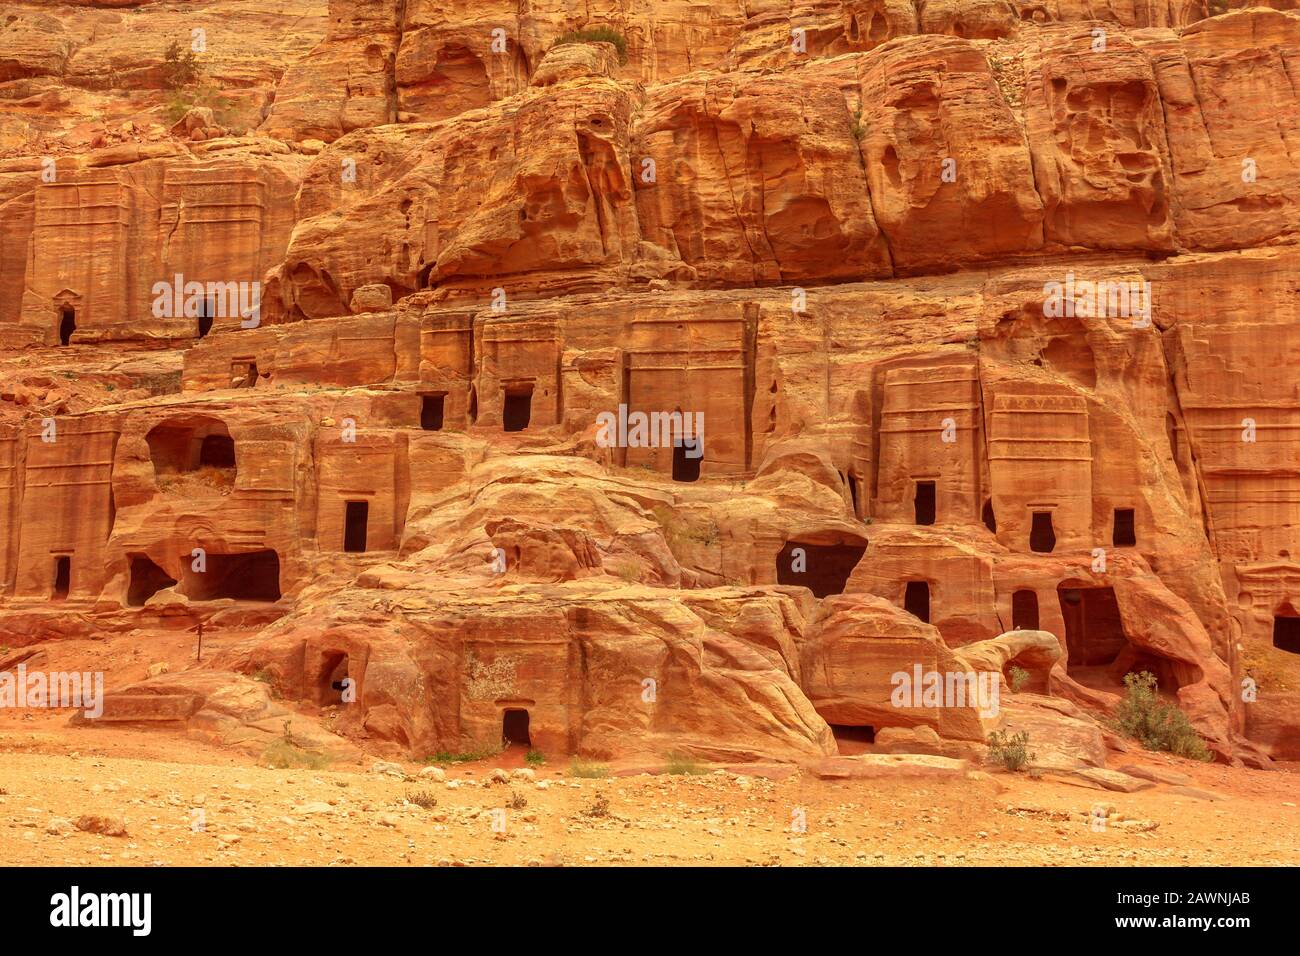 Closeup of Urn tomb, the Court, located in the side of the mountain known as al-Khubta, above Wadi Musa in Petra, Red Rose city, in Jordan. Stock Photo